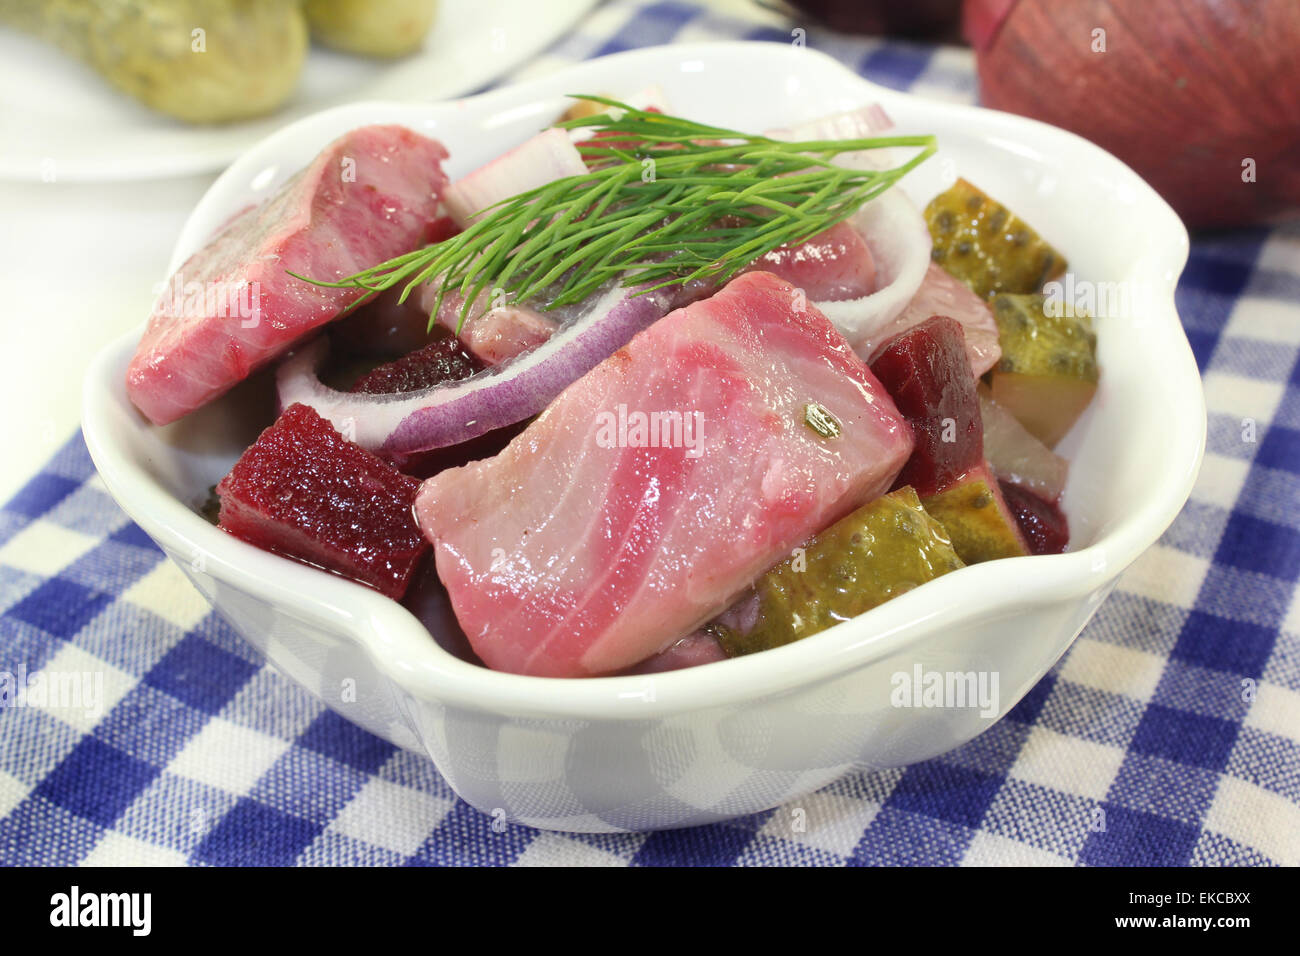 Matie salad with beetroot, onions and pickles Stock Photo